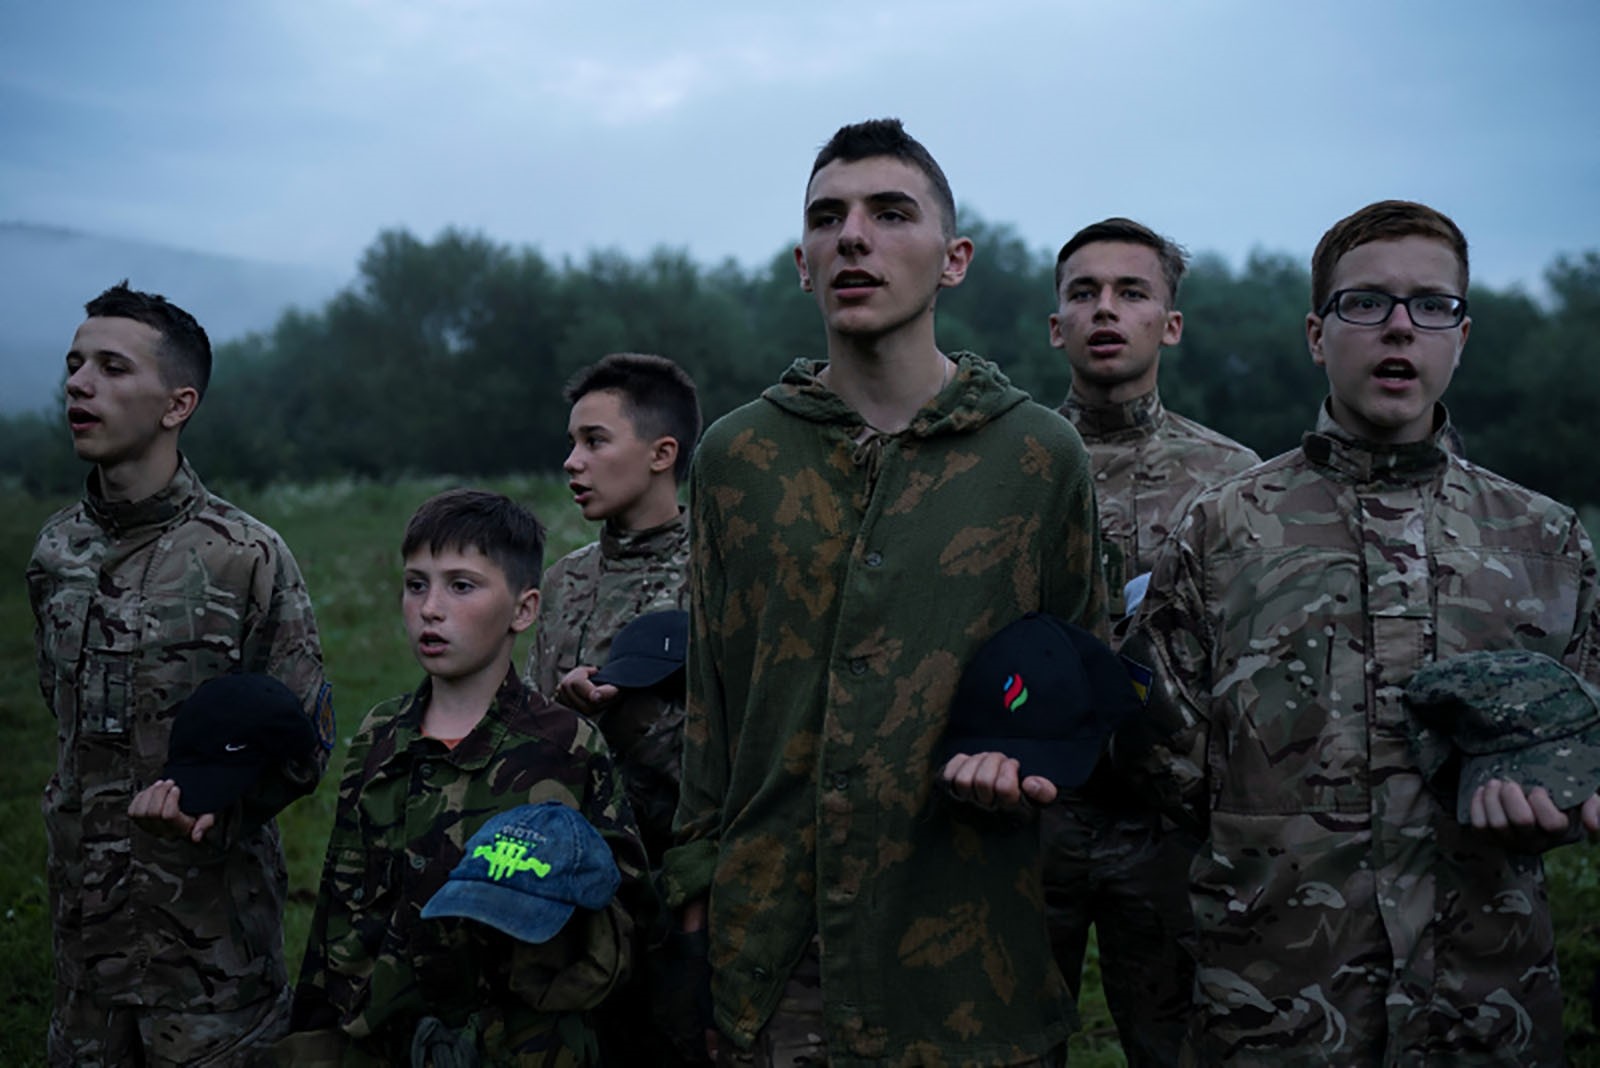 Mykhailo, 18, center, leads other young participants of the camp as they stand in formation singing nationalist songs.